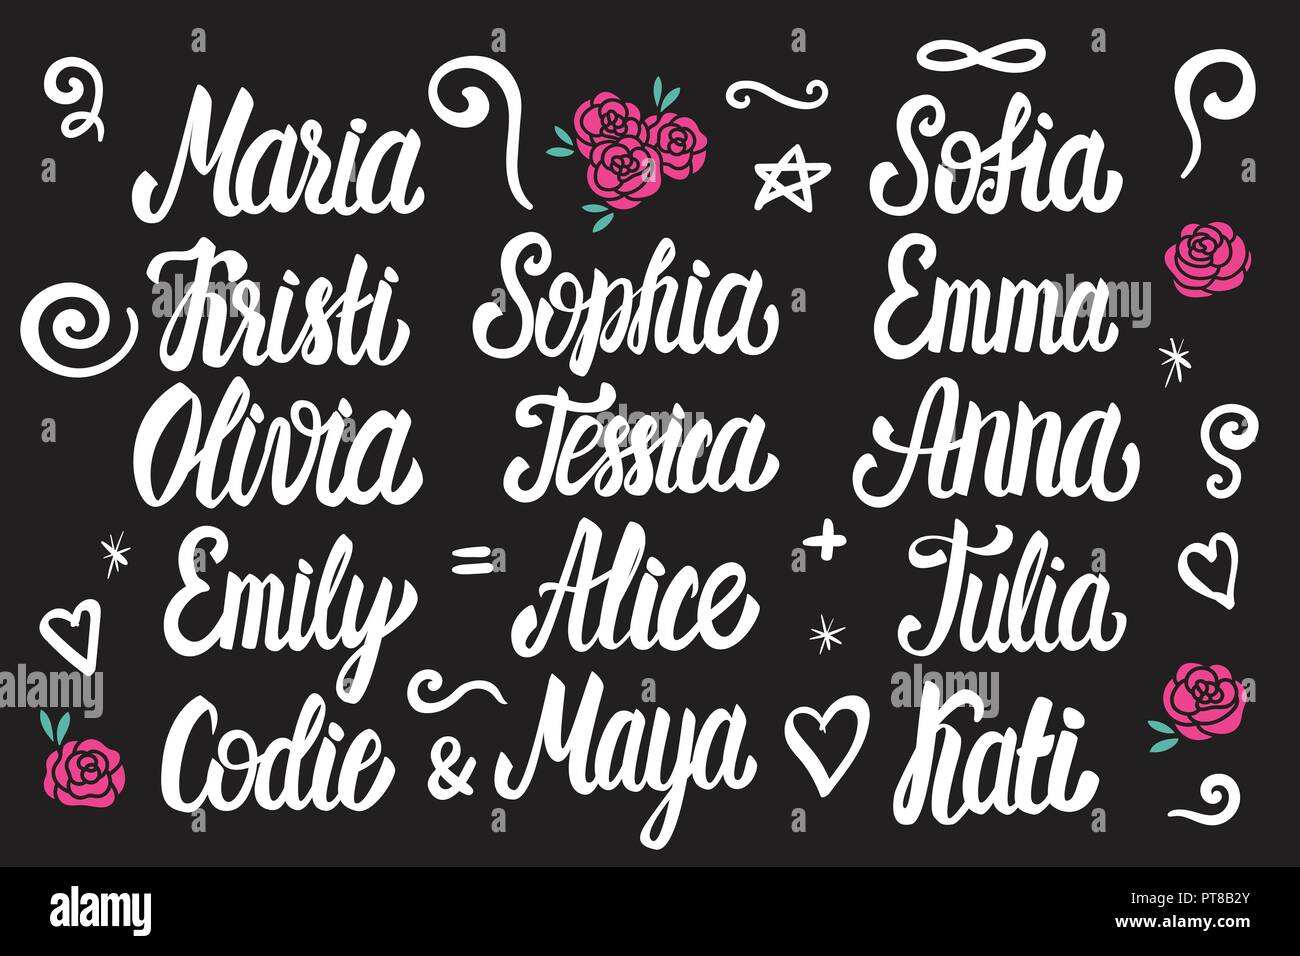 Set of female names. Lettering white vintage style isolated on dark background. Stock Vector